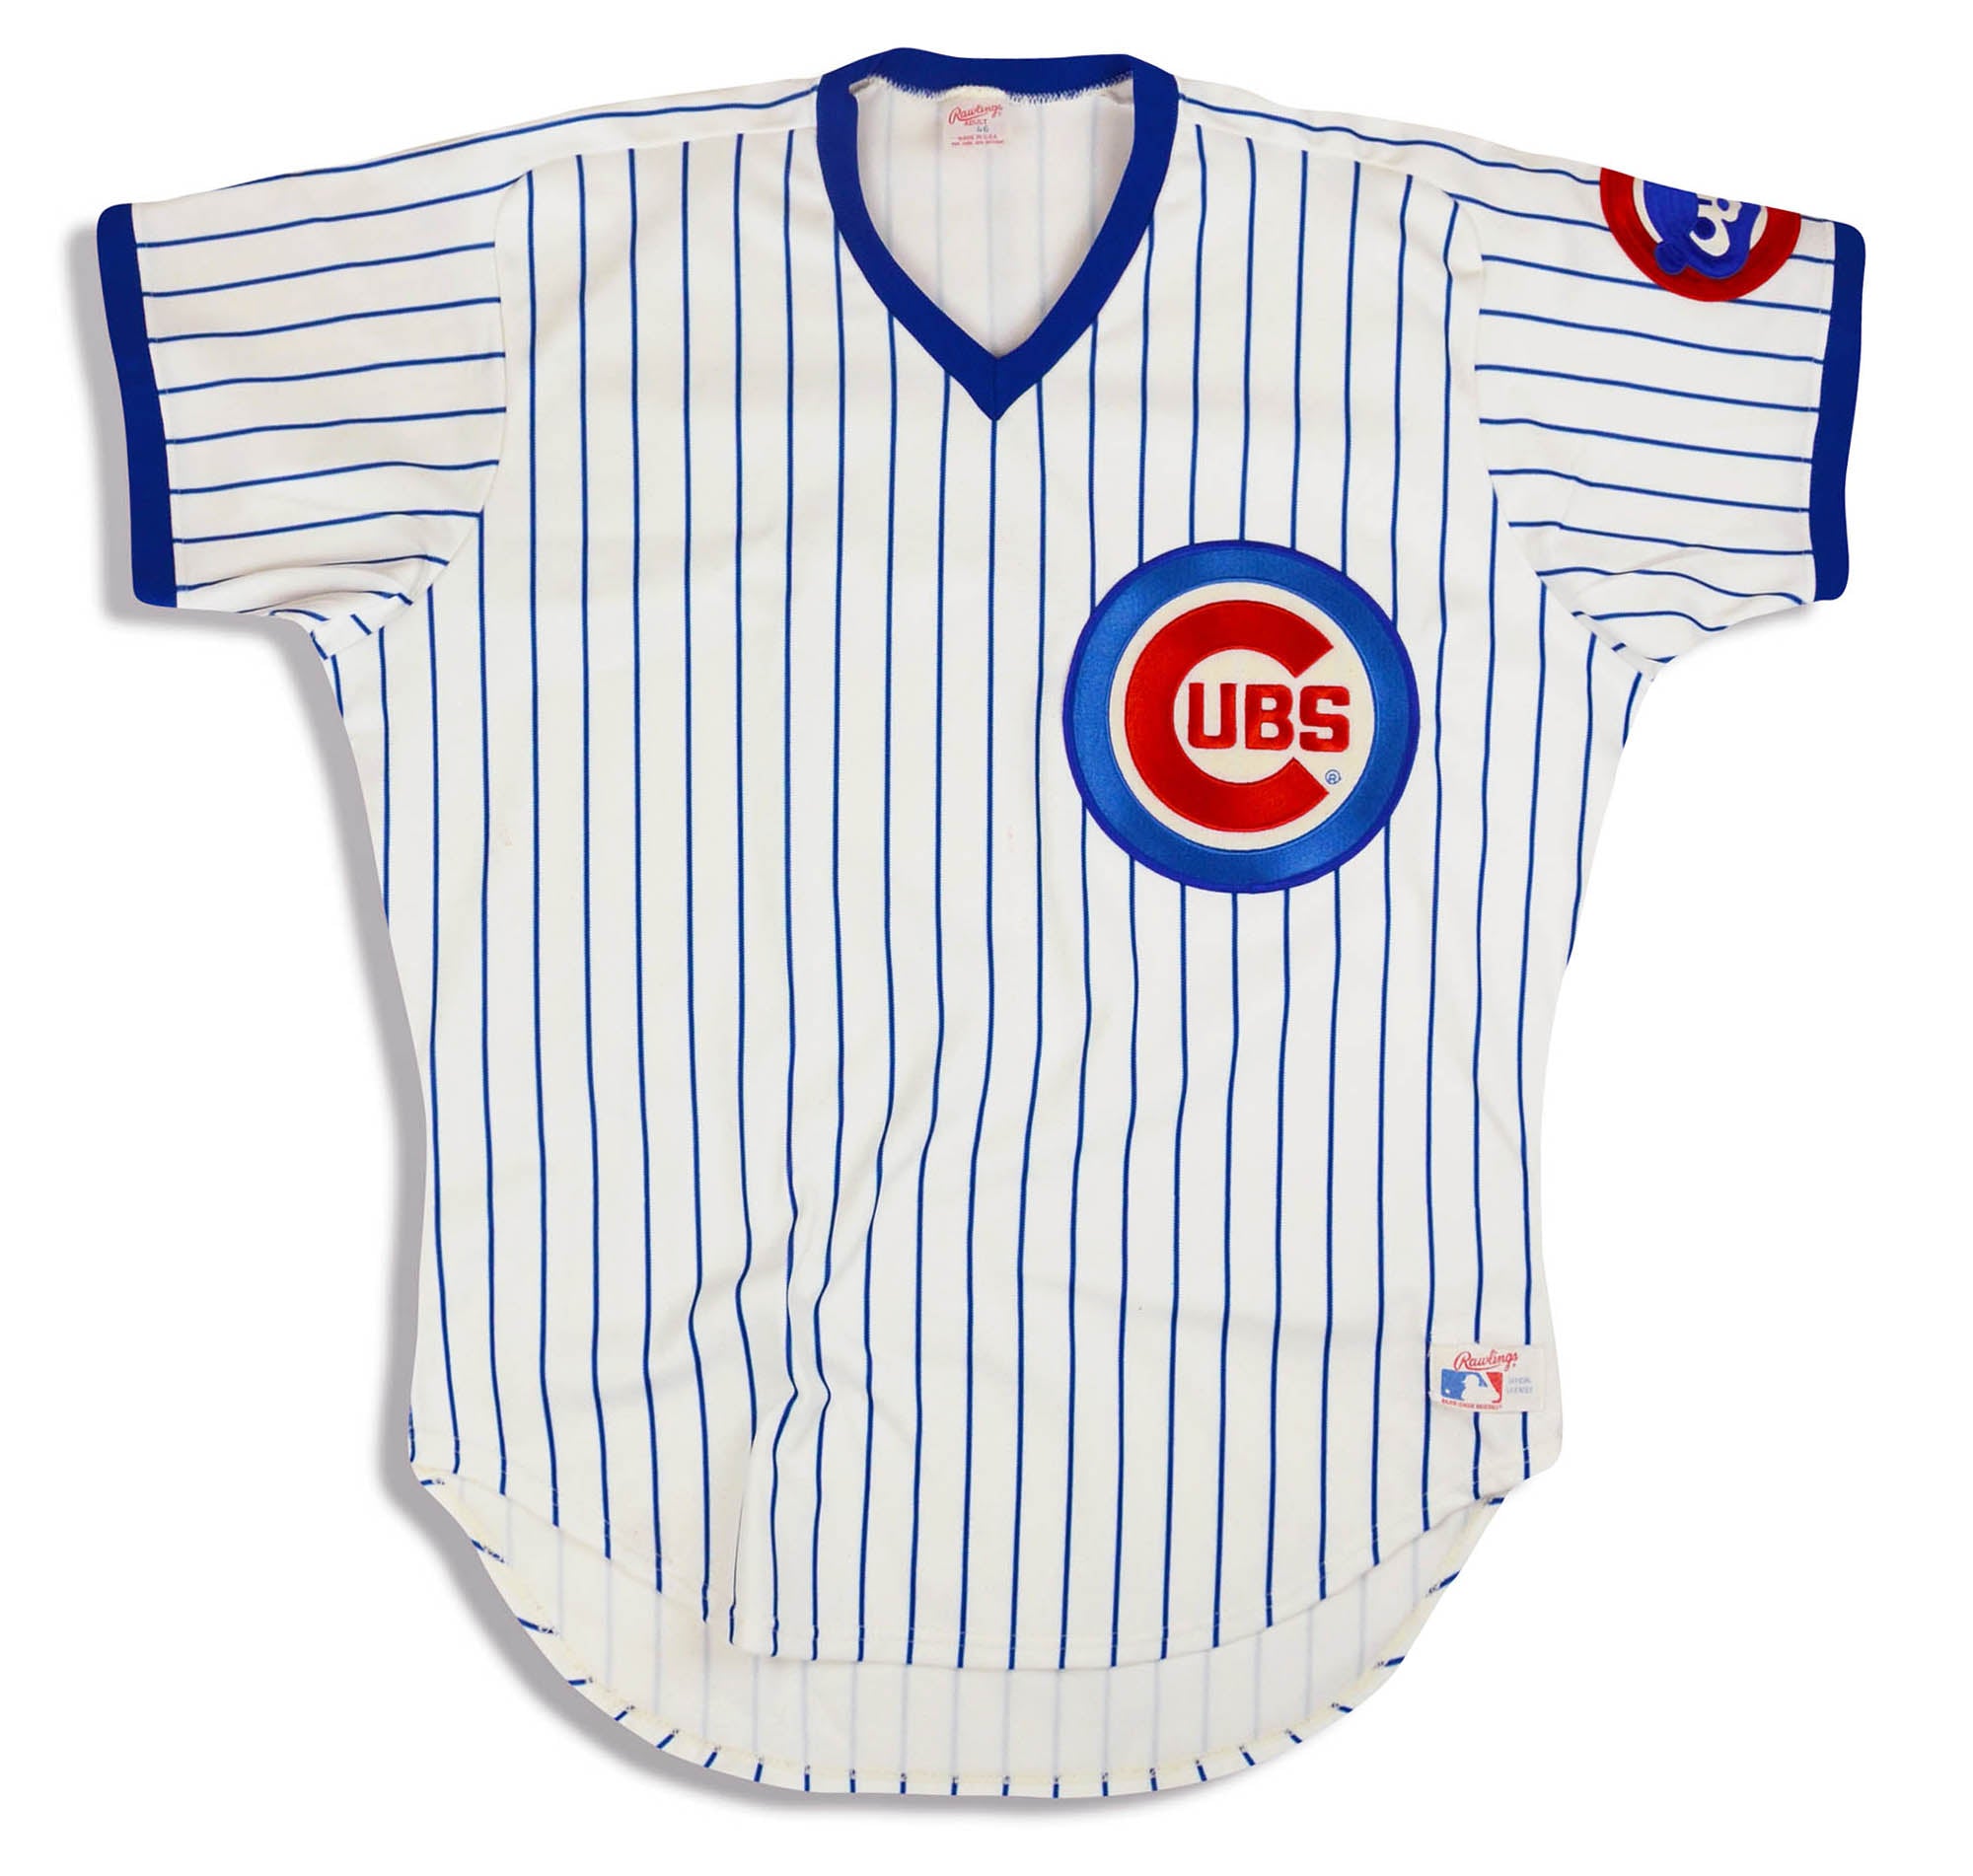 1987-89 CHICAGO CUBS RAWLINGS JERSEY (HOME) XL - Classic American